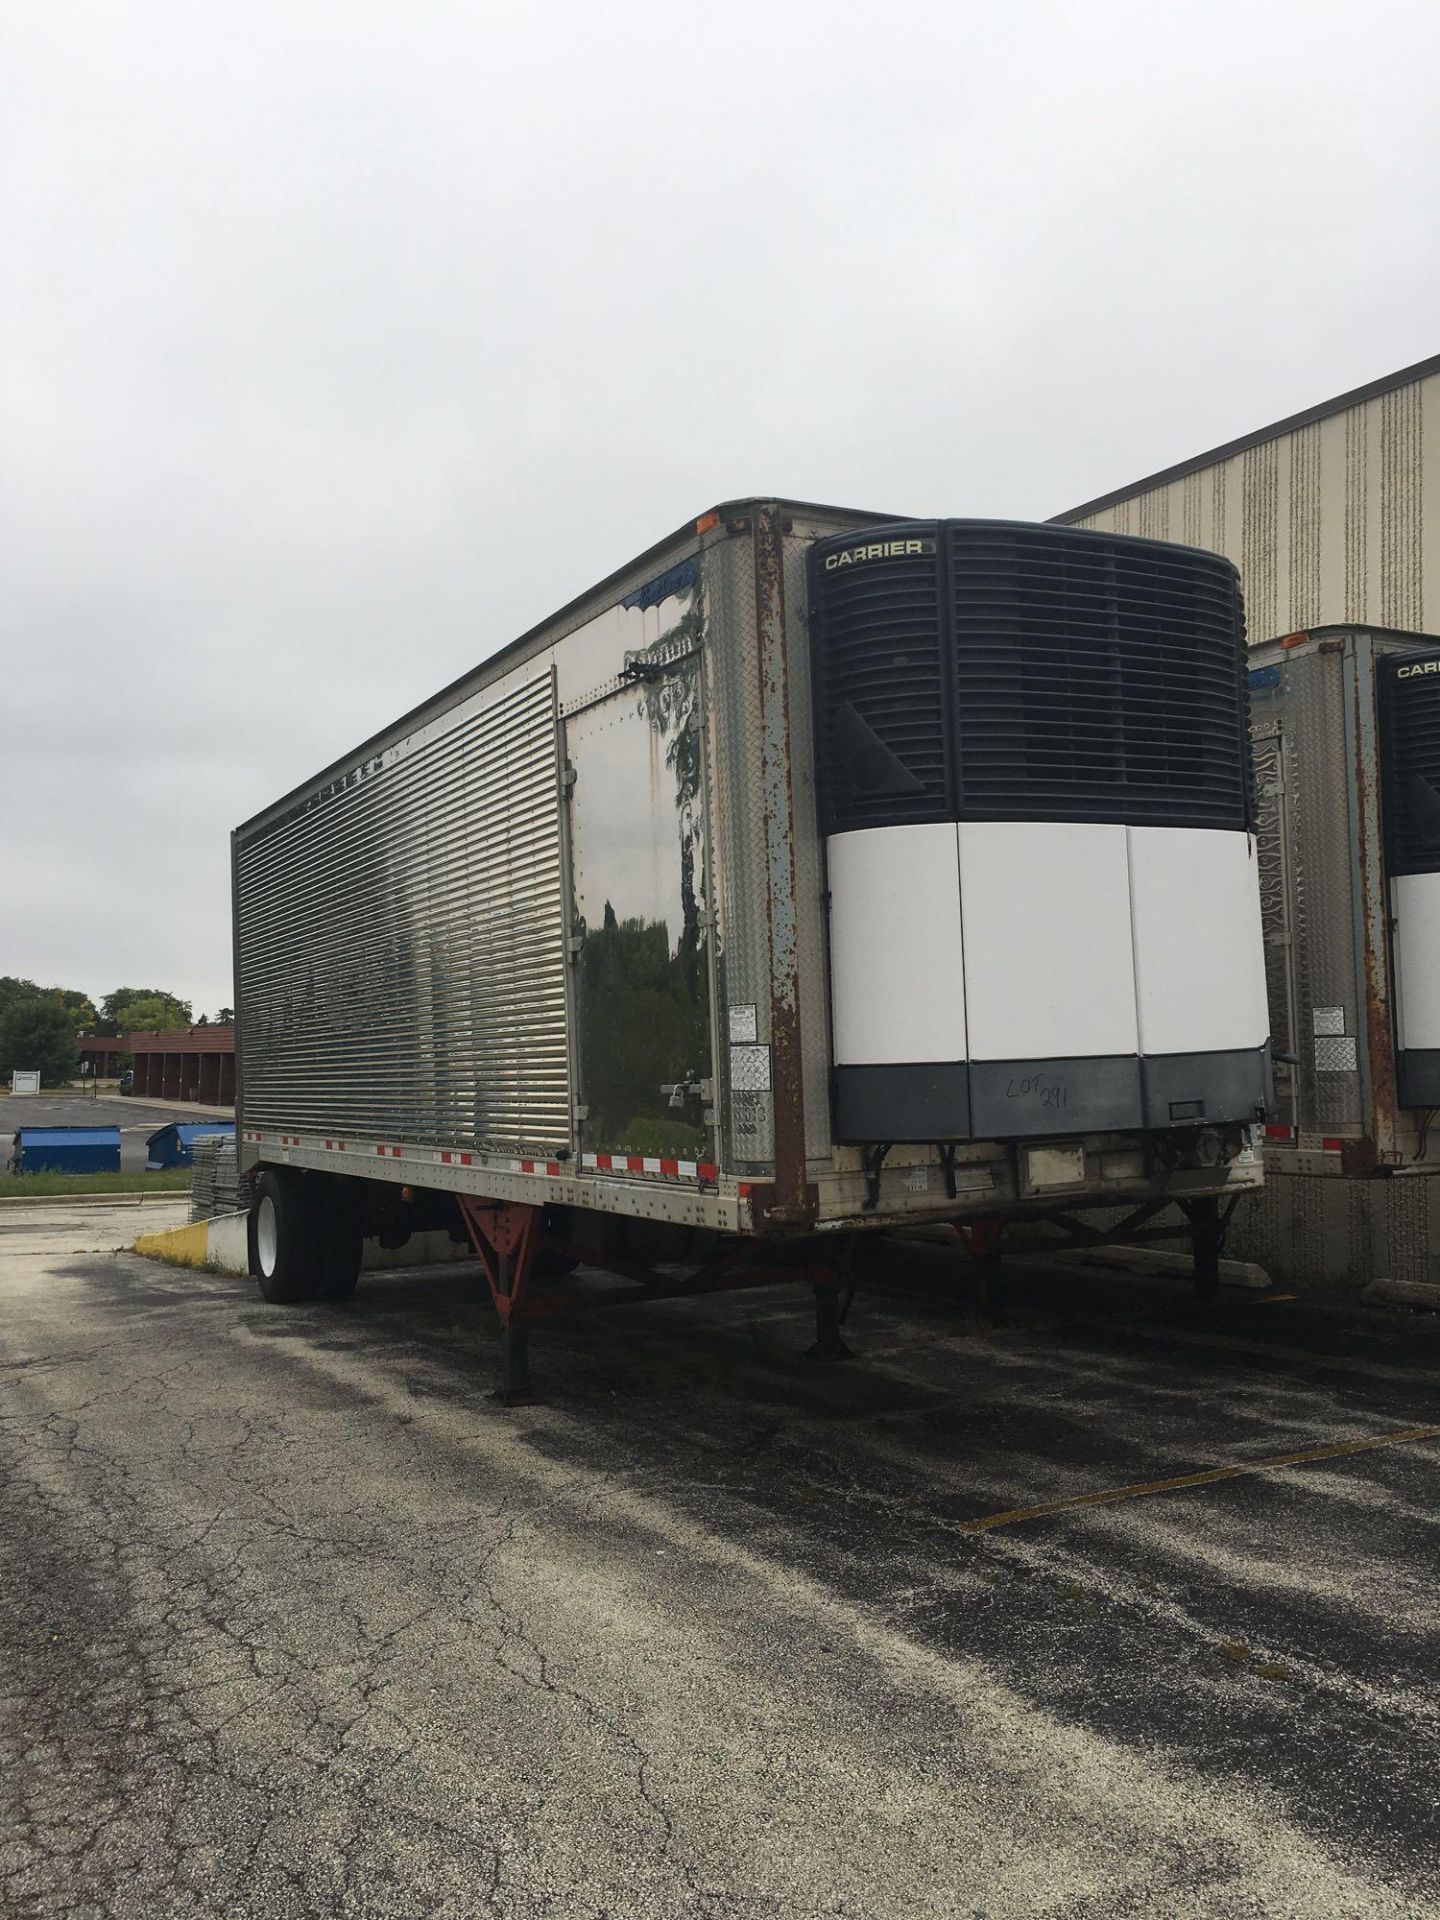 GREAT DANE 29 ft. Stainless Steel Side SA Refrigerated Trailer Carrier Refrigeration VIN 1GRAA56157S